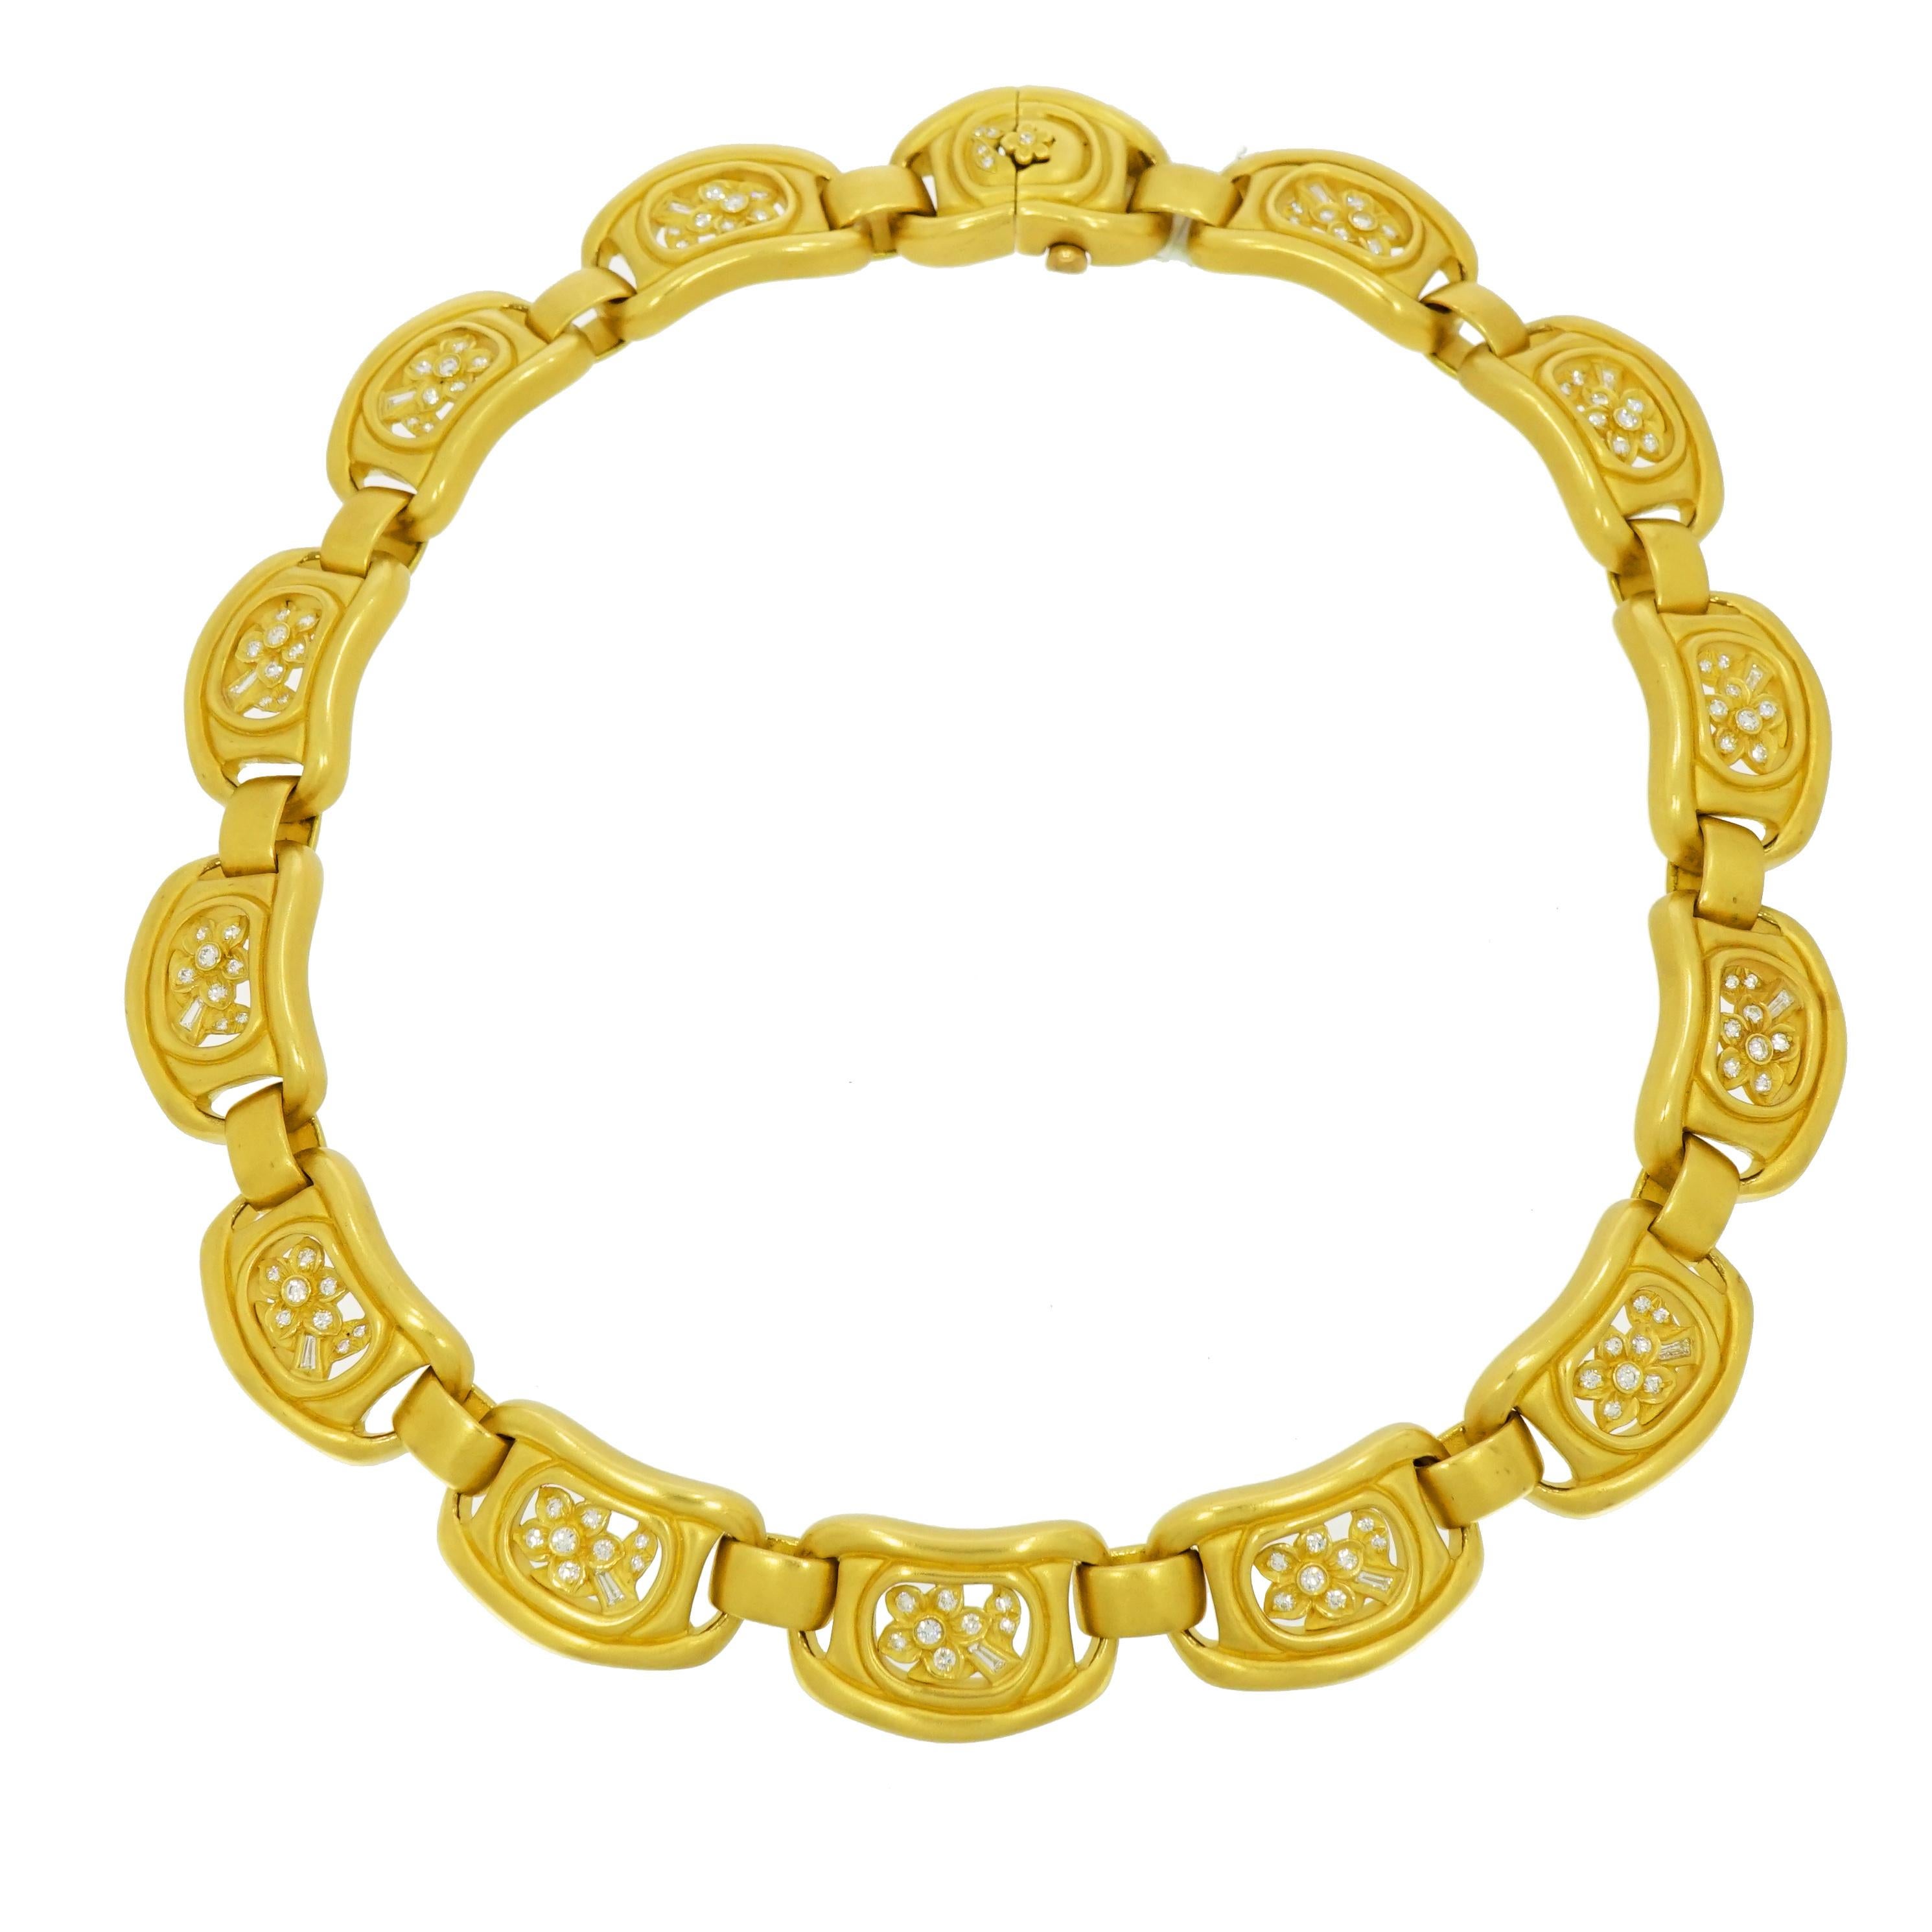 Barry Kieselstein-Cord (BKC) is a critically acclaimed, international, award-winning legendary American designer, artist, and photographer.
This 18k yellow gold necklace is composed of soft organic shaped links centering flowers and leaves, accented